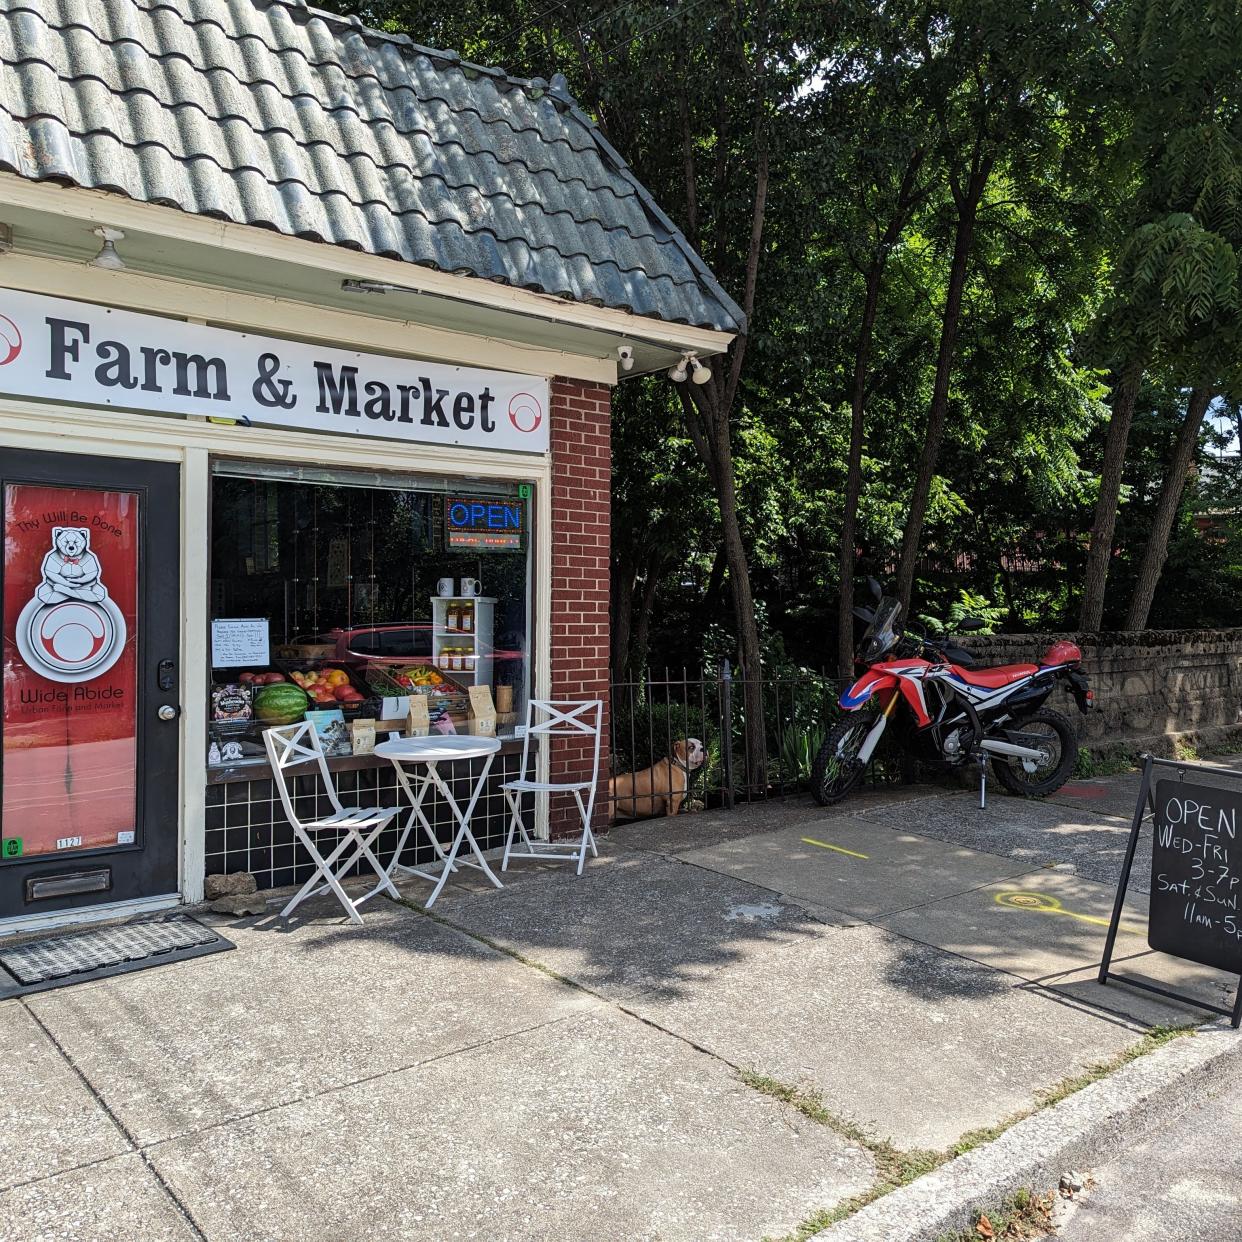 The grand opening for Wide Abide Farm & Market is Sept. 1. The Germantown business provides fresh, local produce, dairy, meat and more to the community.